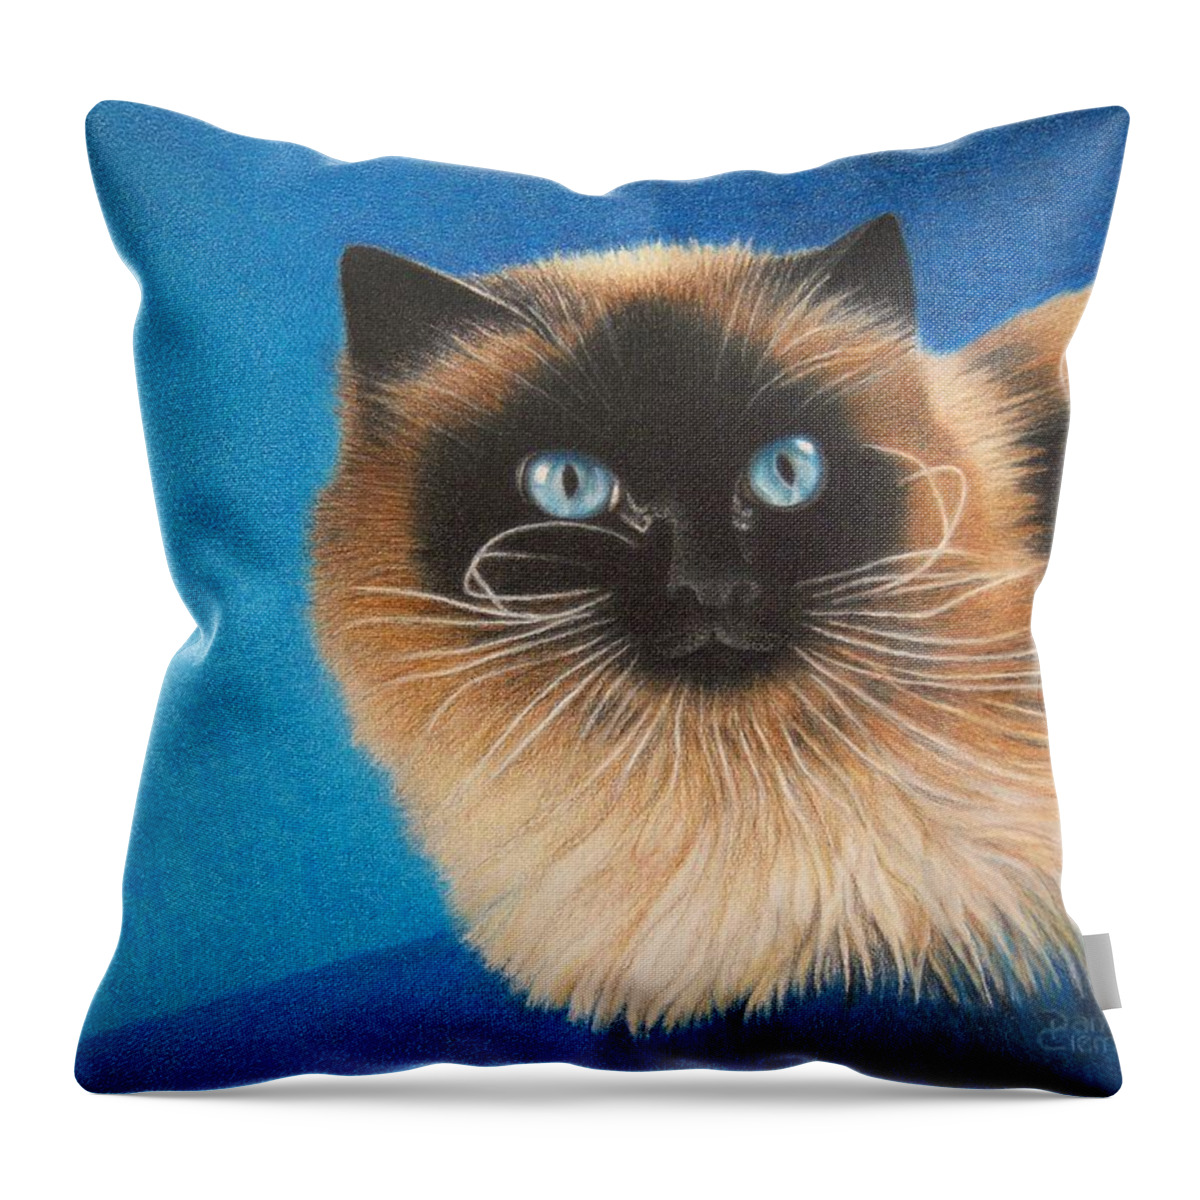 Cat Throw Pillow featuring the drawing Mr. Blue by Pamela Clements